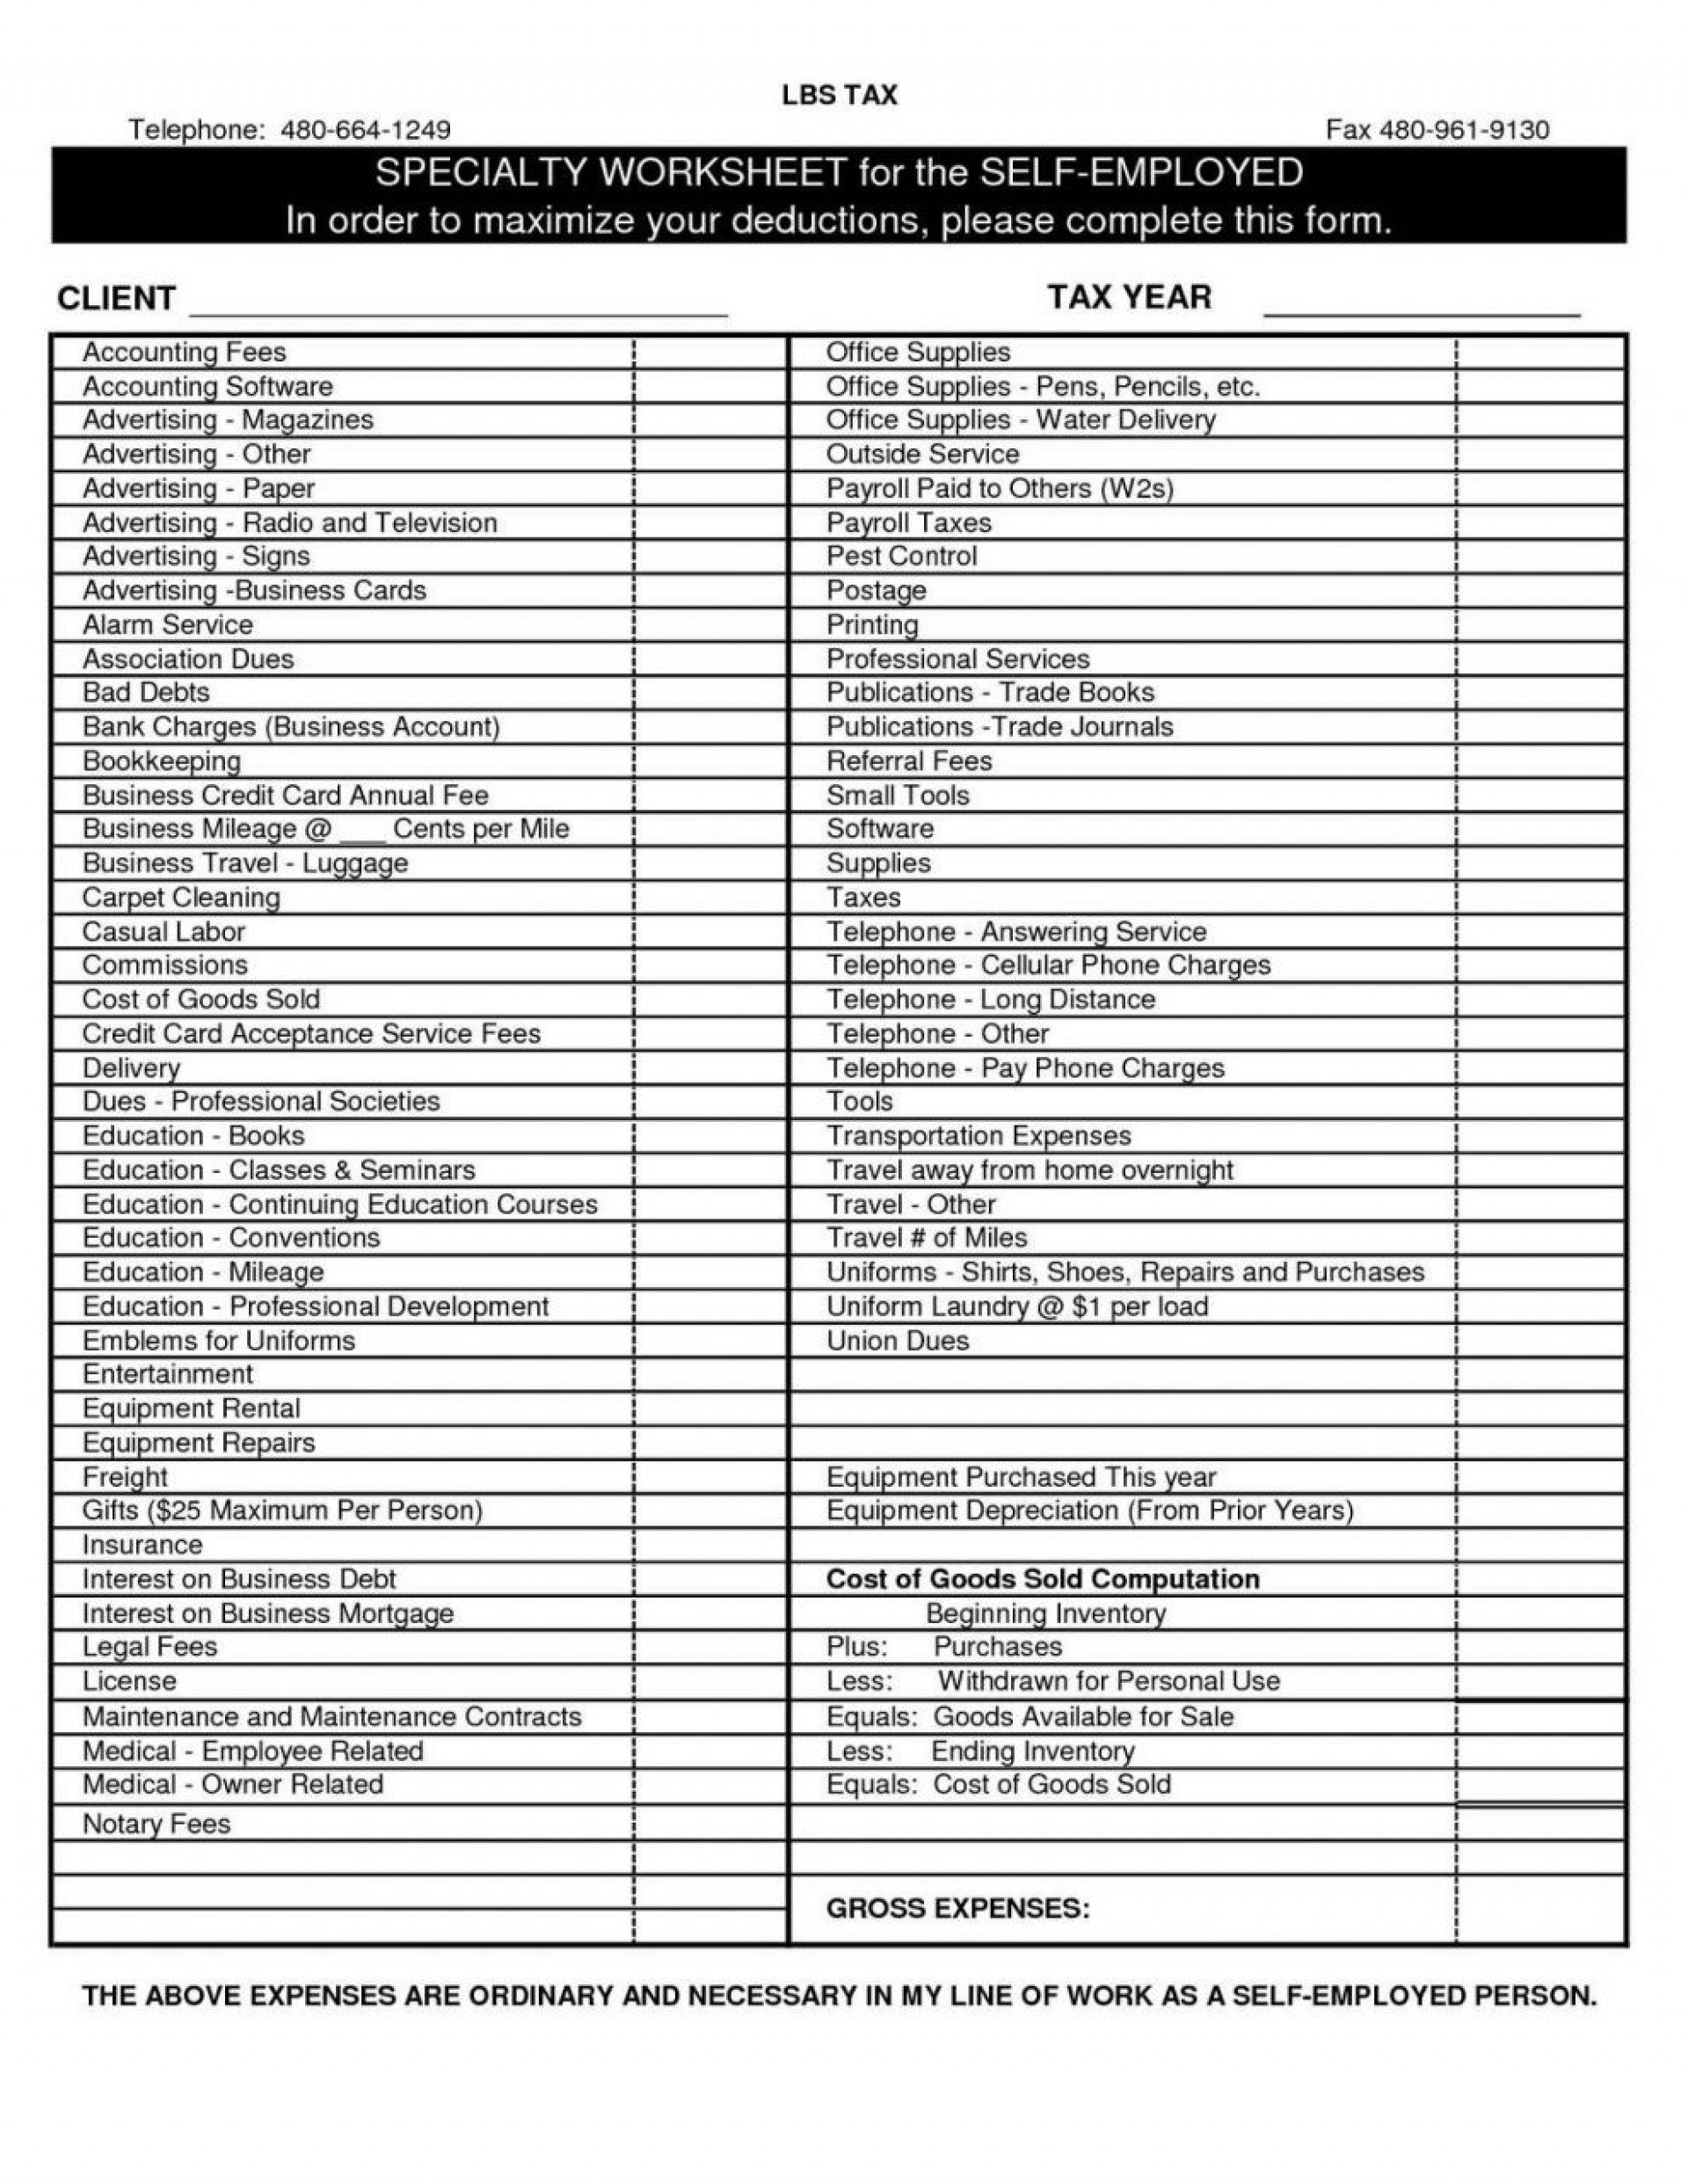 2017 Self Employment Tax And Deduction Worksheet  Yooob Together With 2017 Self Employment Tax And Deduction Worksheet